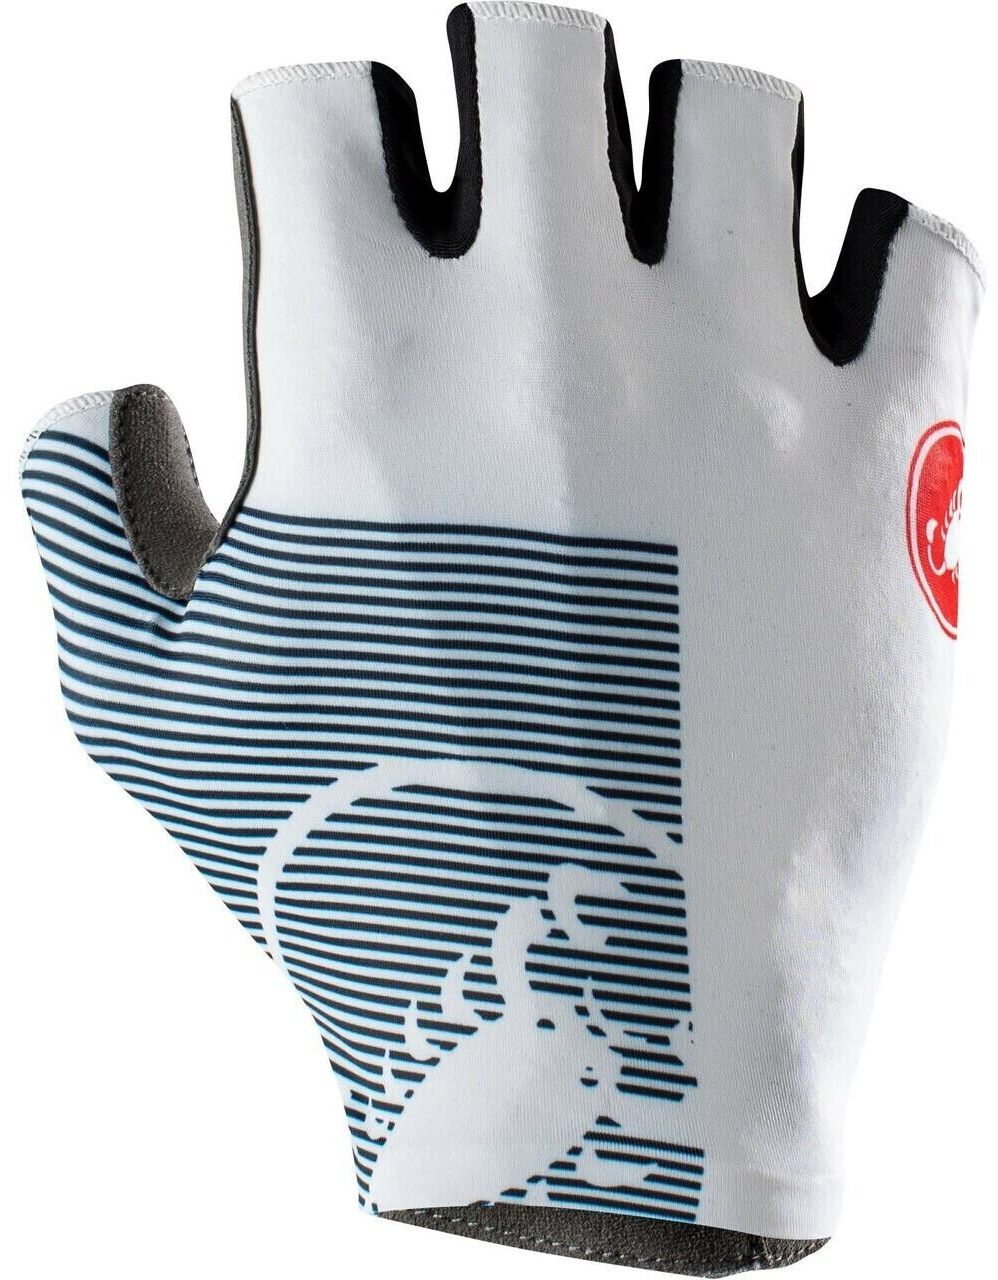 Photos - Cycling Gloves Castelli Competizione 2 gloves ivory/savile blue 